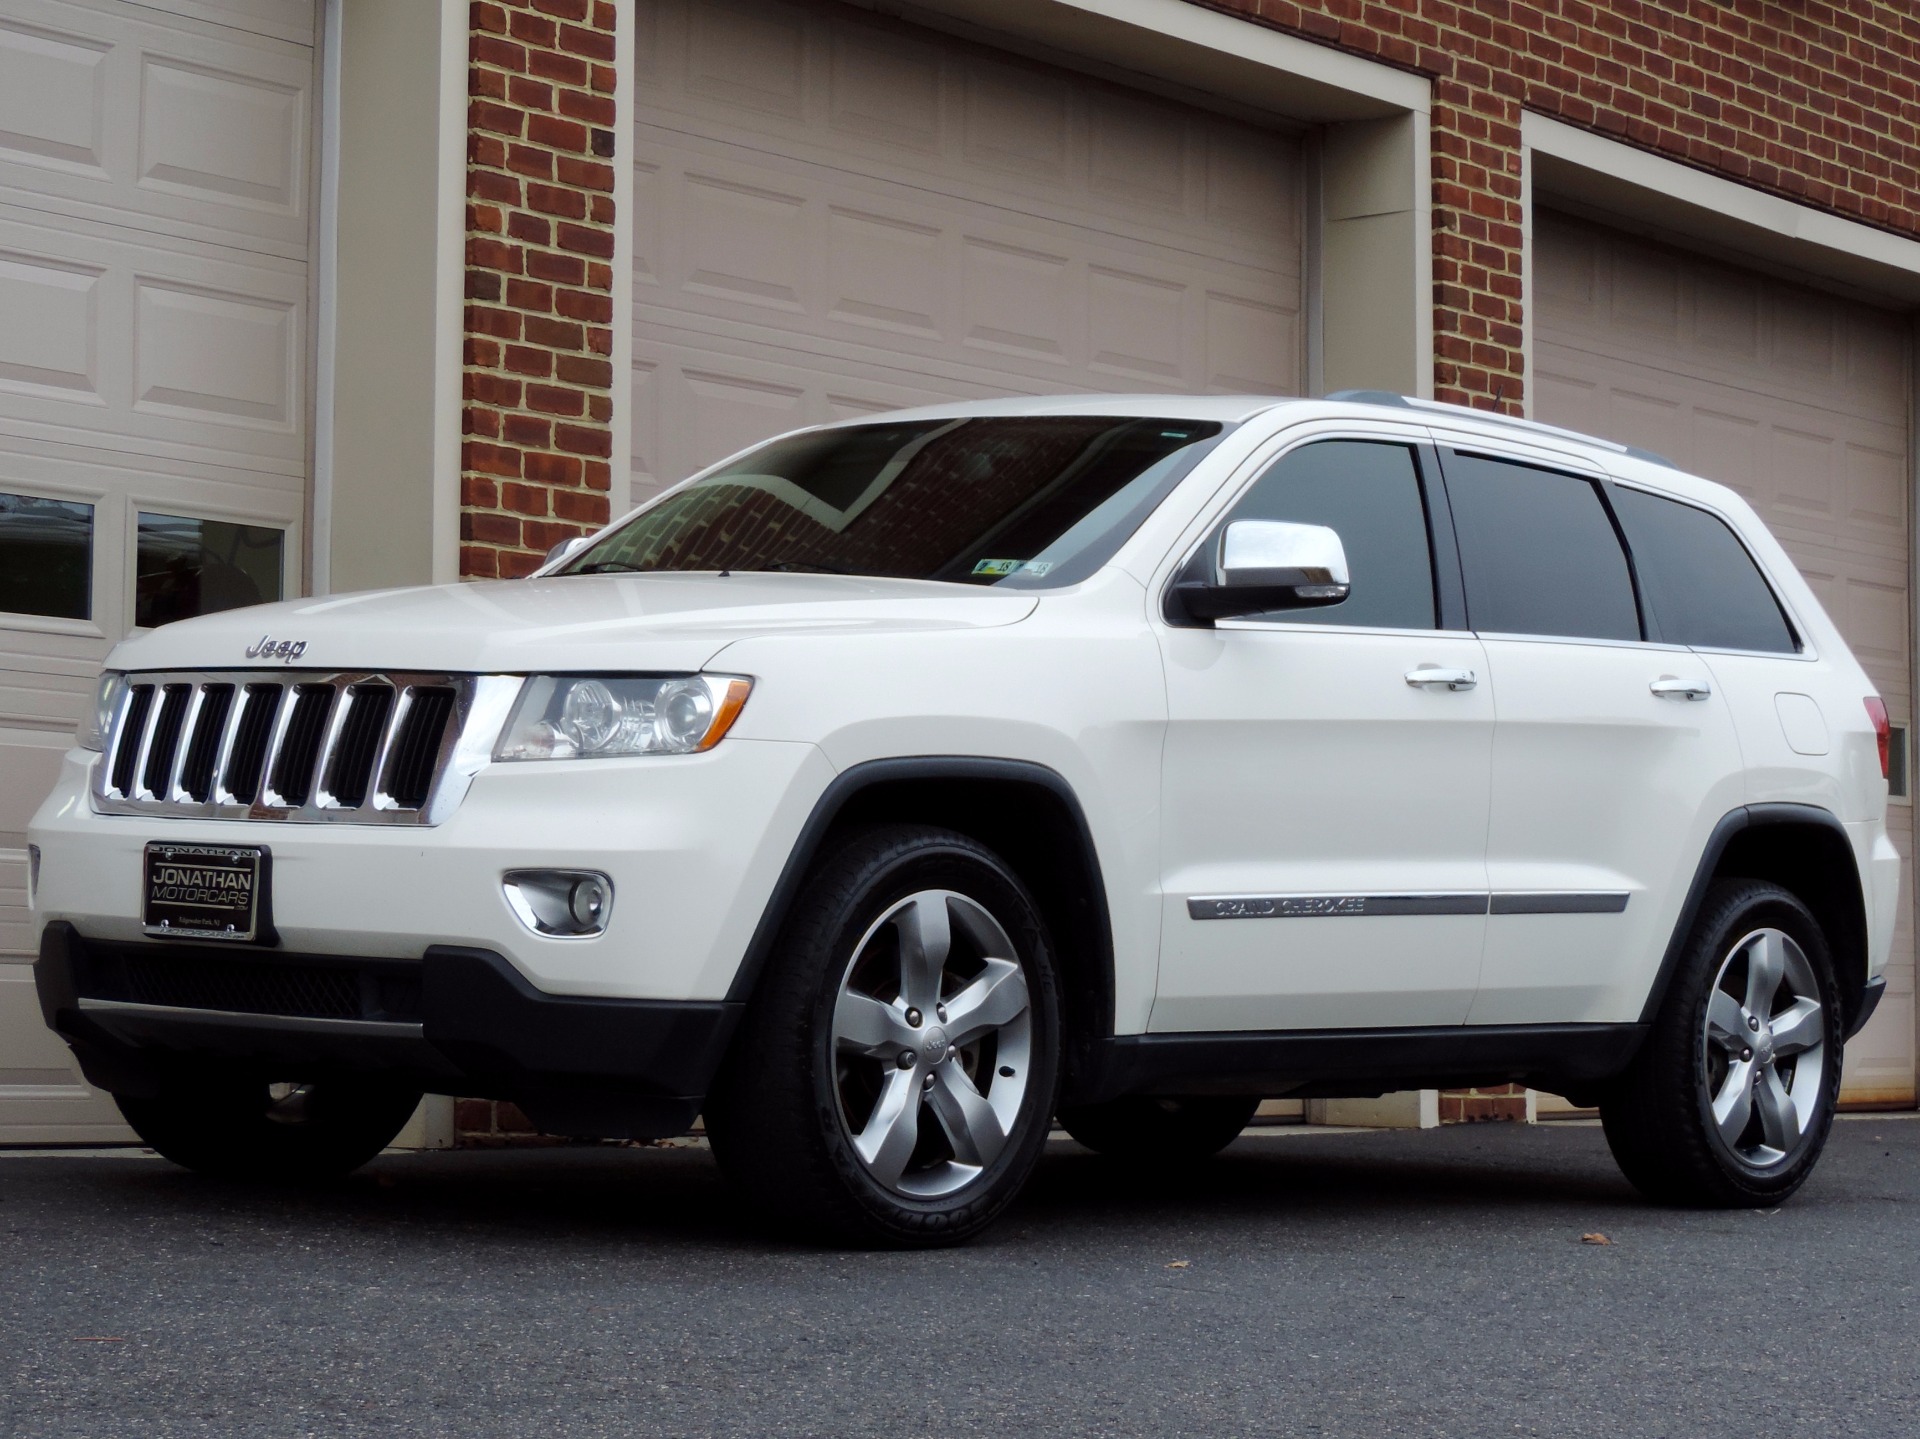 2012 Jeep Grand Cherokee Limited Stock # 221084 for sale near Edgewater